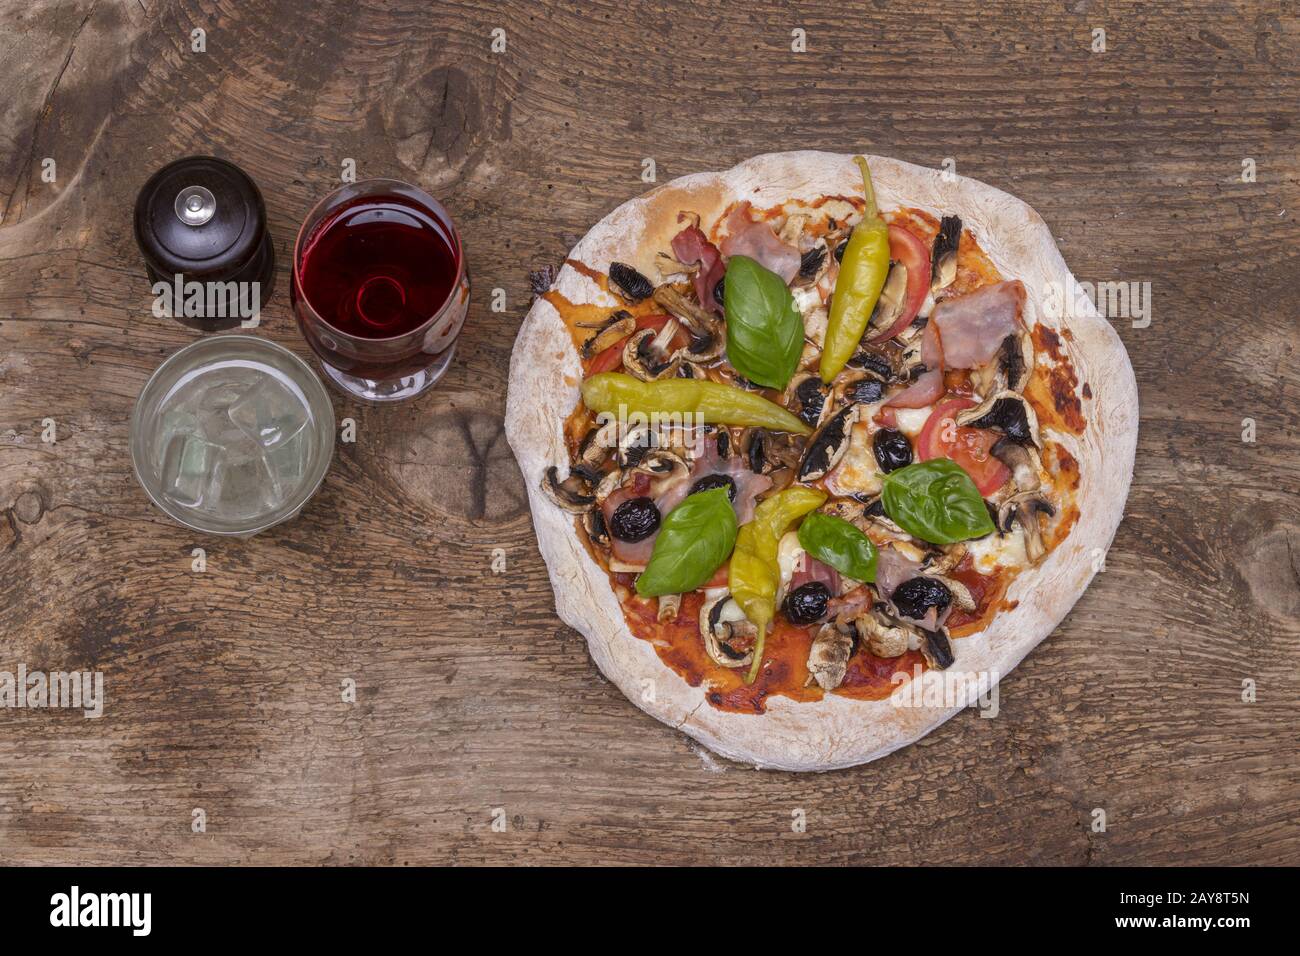 Supervision of a pizza on wood Stock Photo